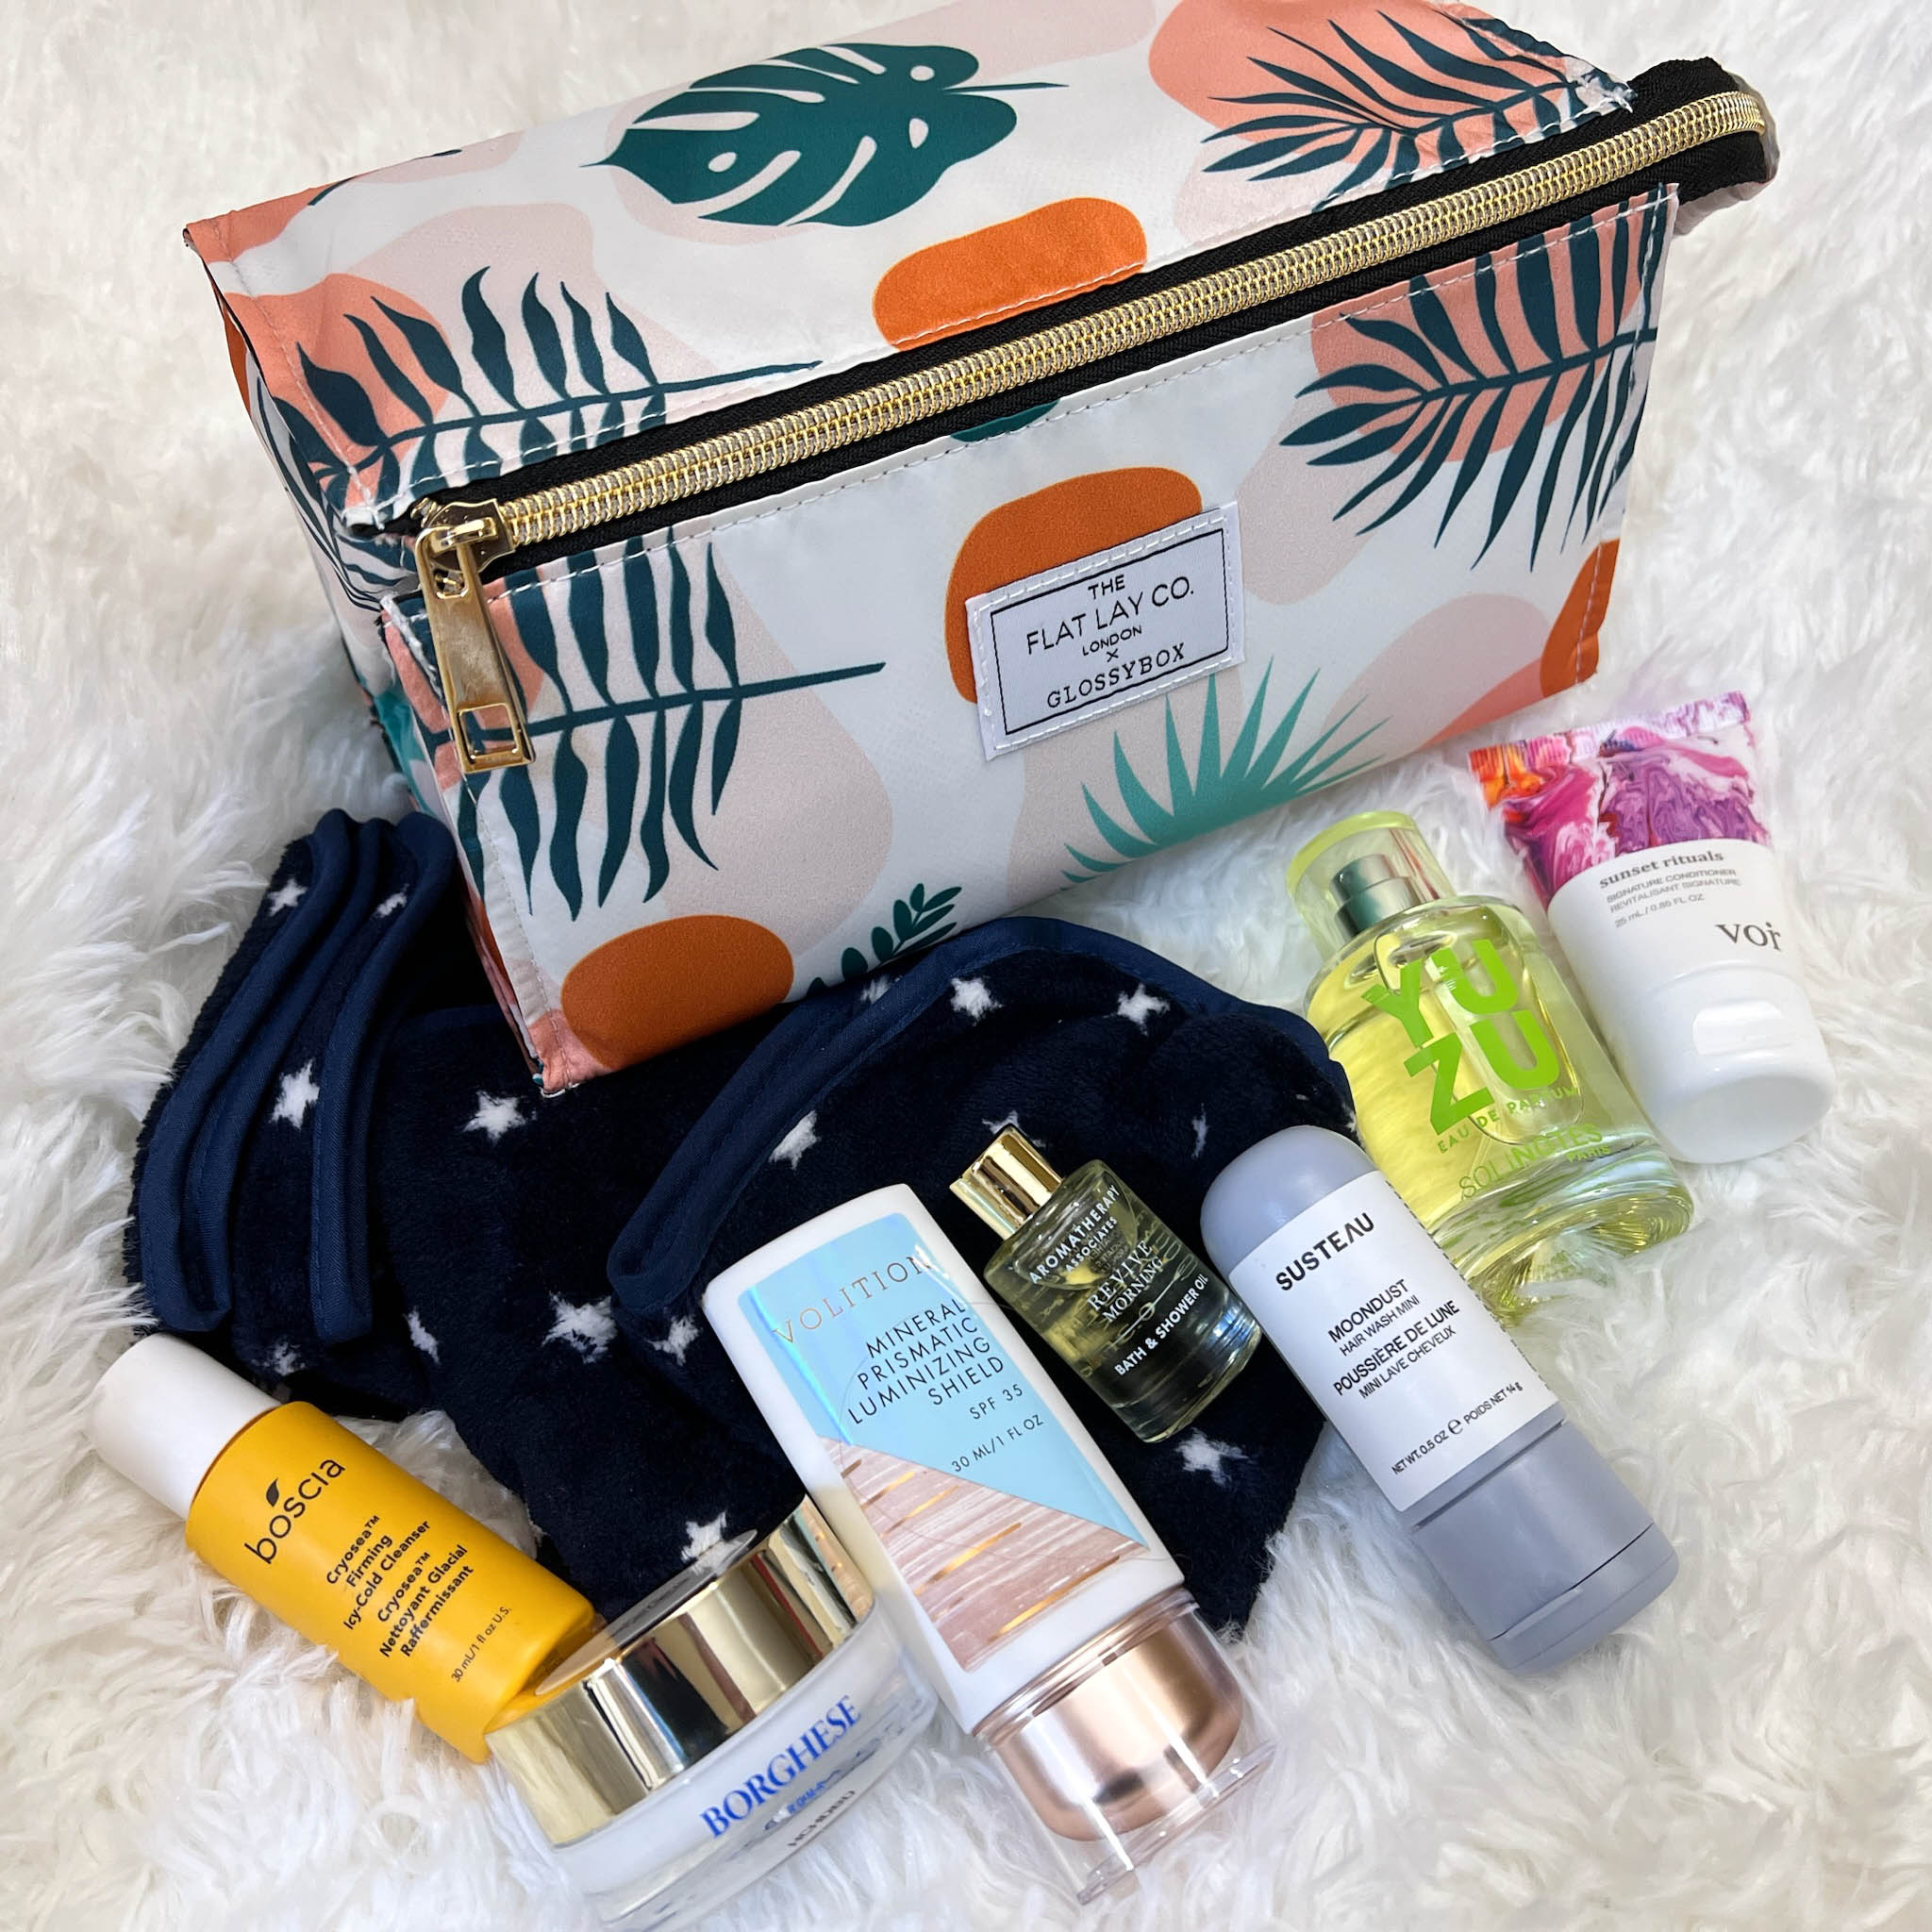 https://hellosubscription.com/wp-content/uploads/2022/08/GLOSSYBOX-x-The-Flat-Lay-Co.-Summer-2022-13.jpg?quality=90&strip=all